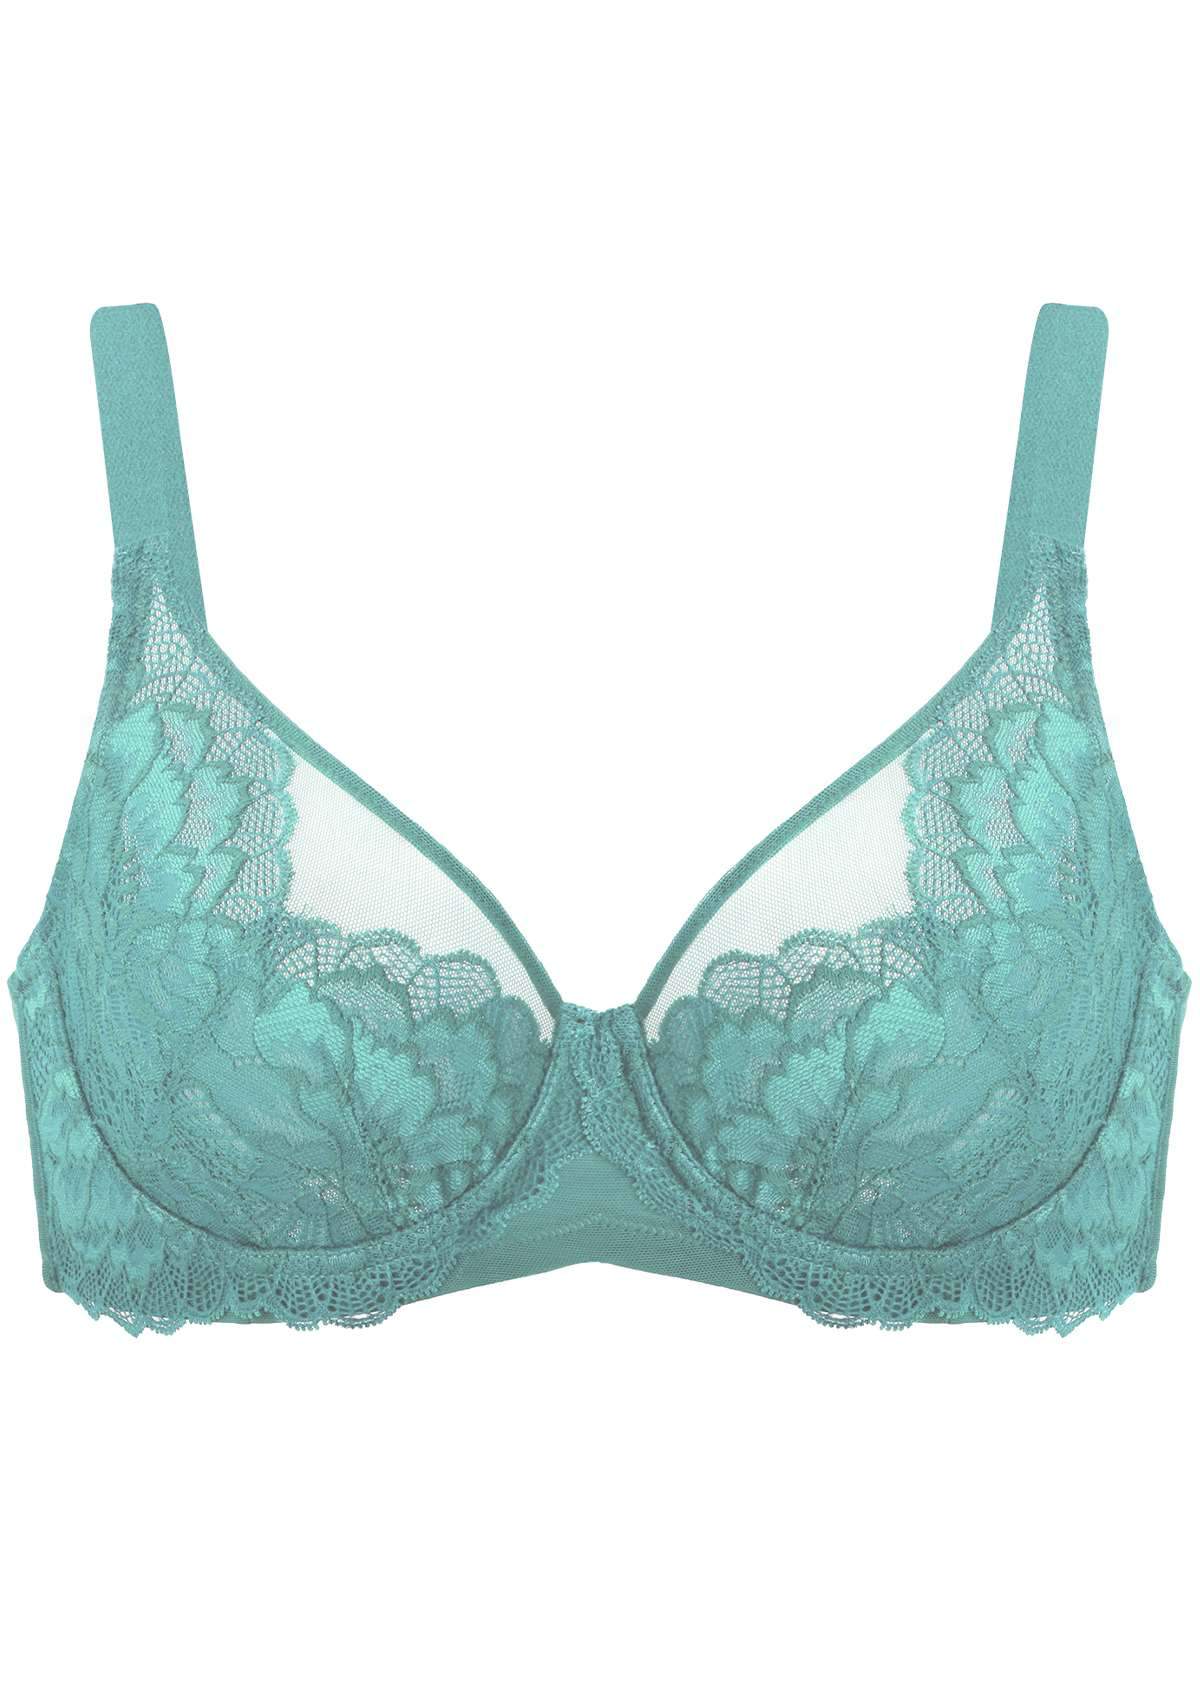 HSIA Paeonia Lace Full Coverage Underwire Non-Padded Uplifting Bra - Purple / 34 / C